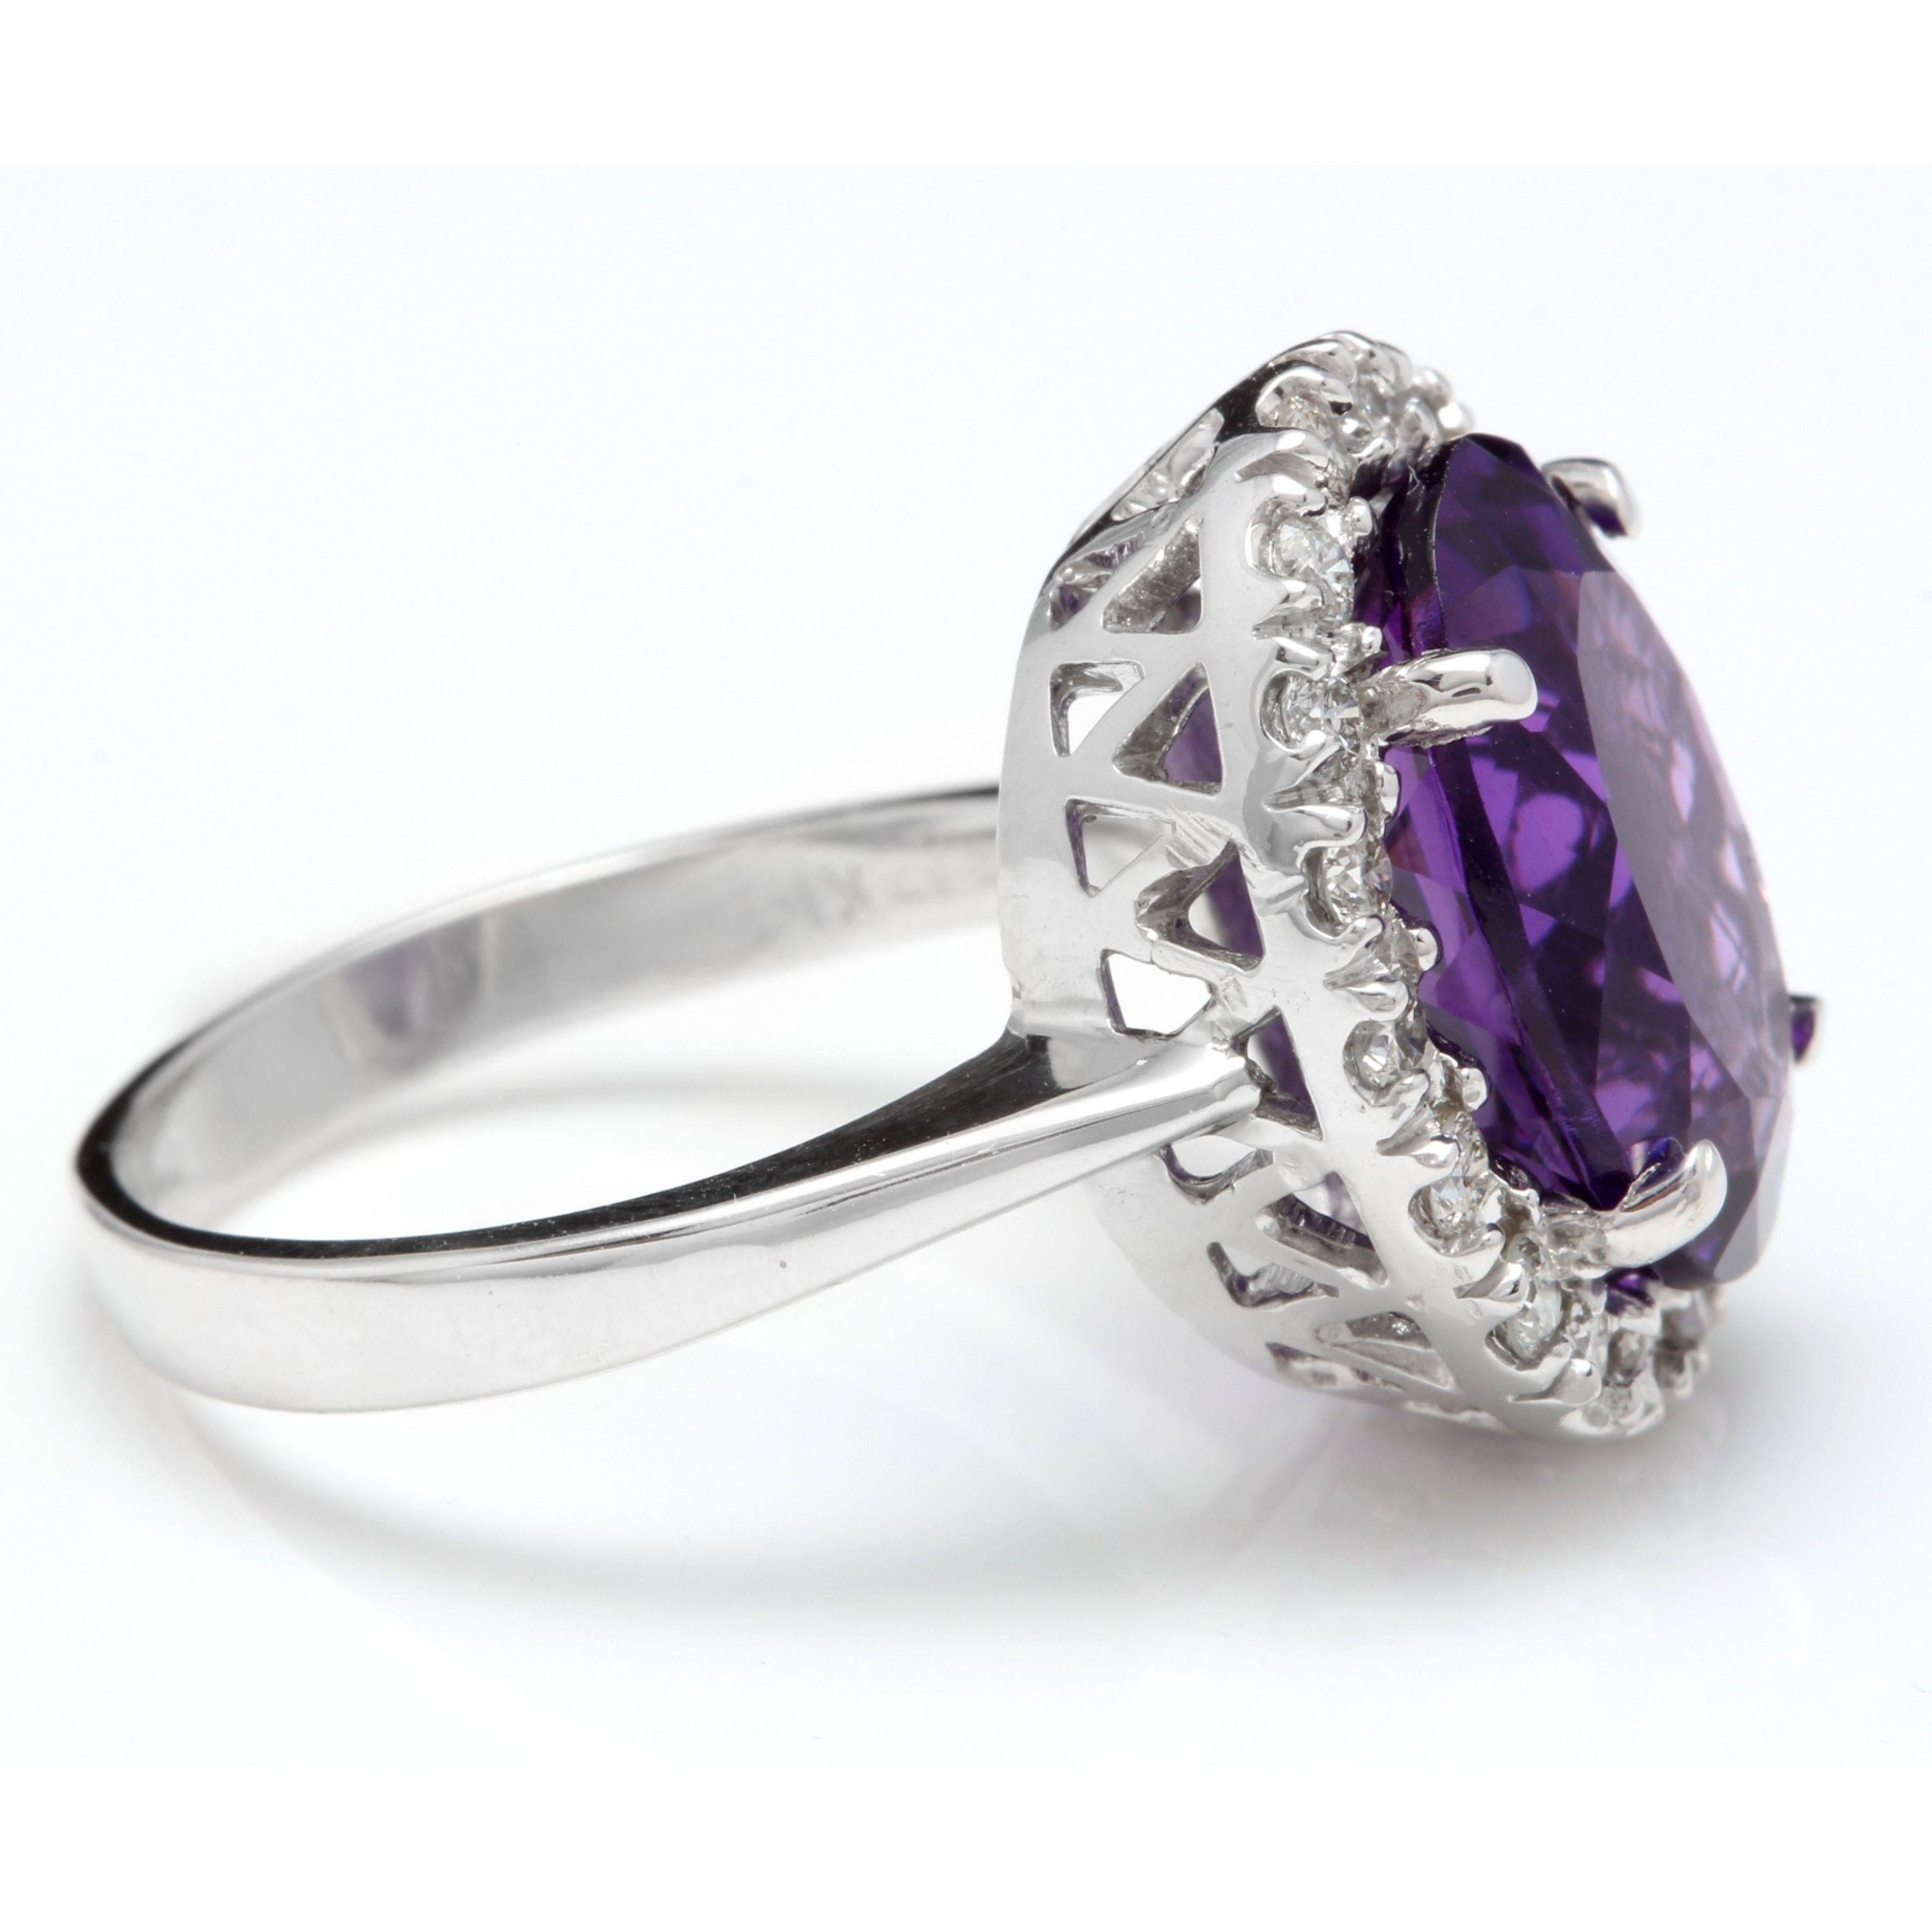 6.25 Carats Natural Amethyst and Diamond 14K Solid White Gold Ring

Total Natural Oval Amethyst Weights: Approx. 5.50 Carats

Amethyst Measures: Approx. 14.00 x 10.00mm

Natural Round Diamonds Weight: Approx. 0.75 Carats (color G-H / Clarity